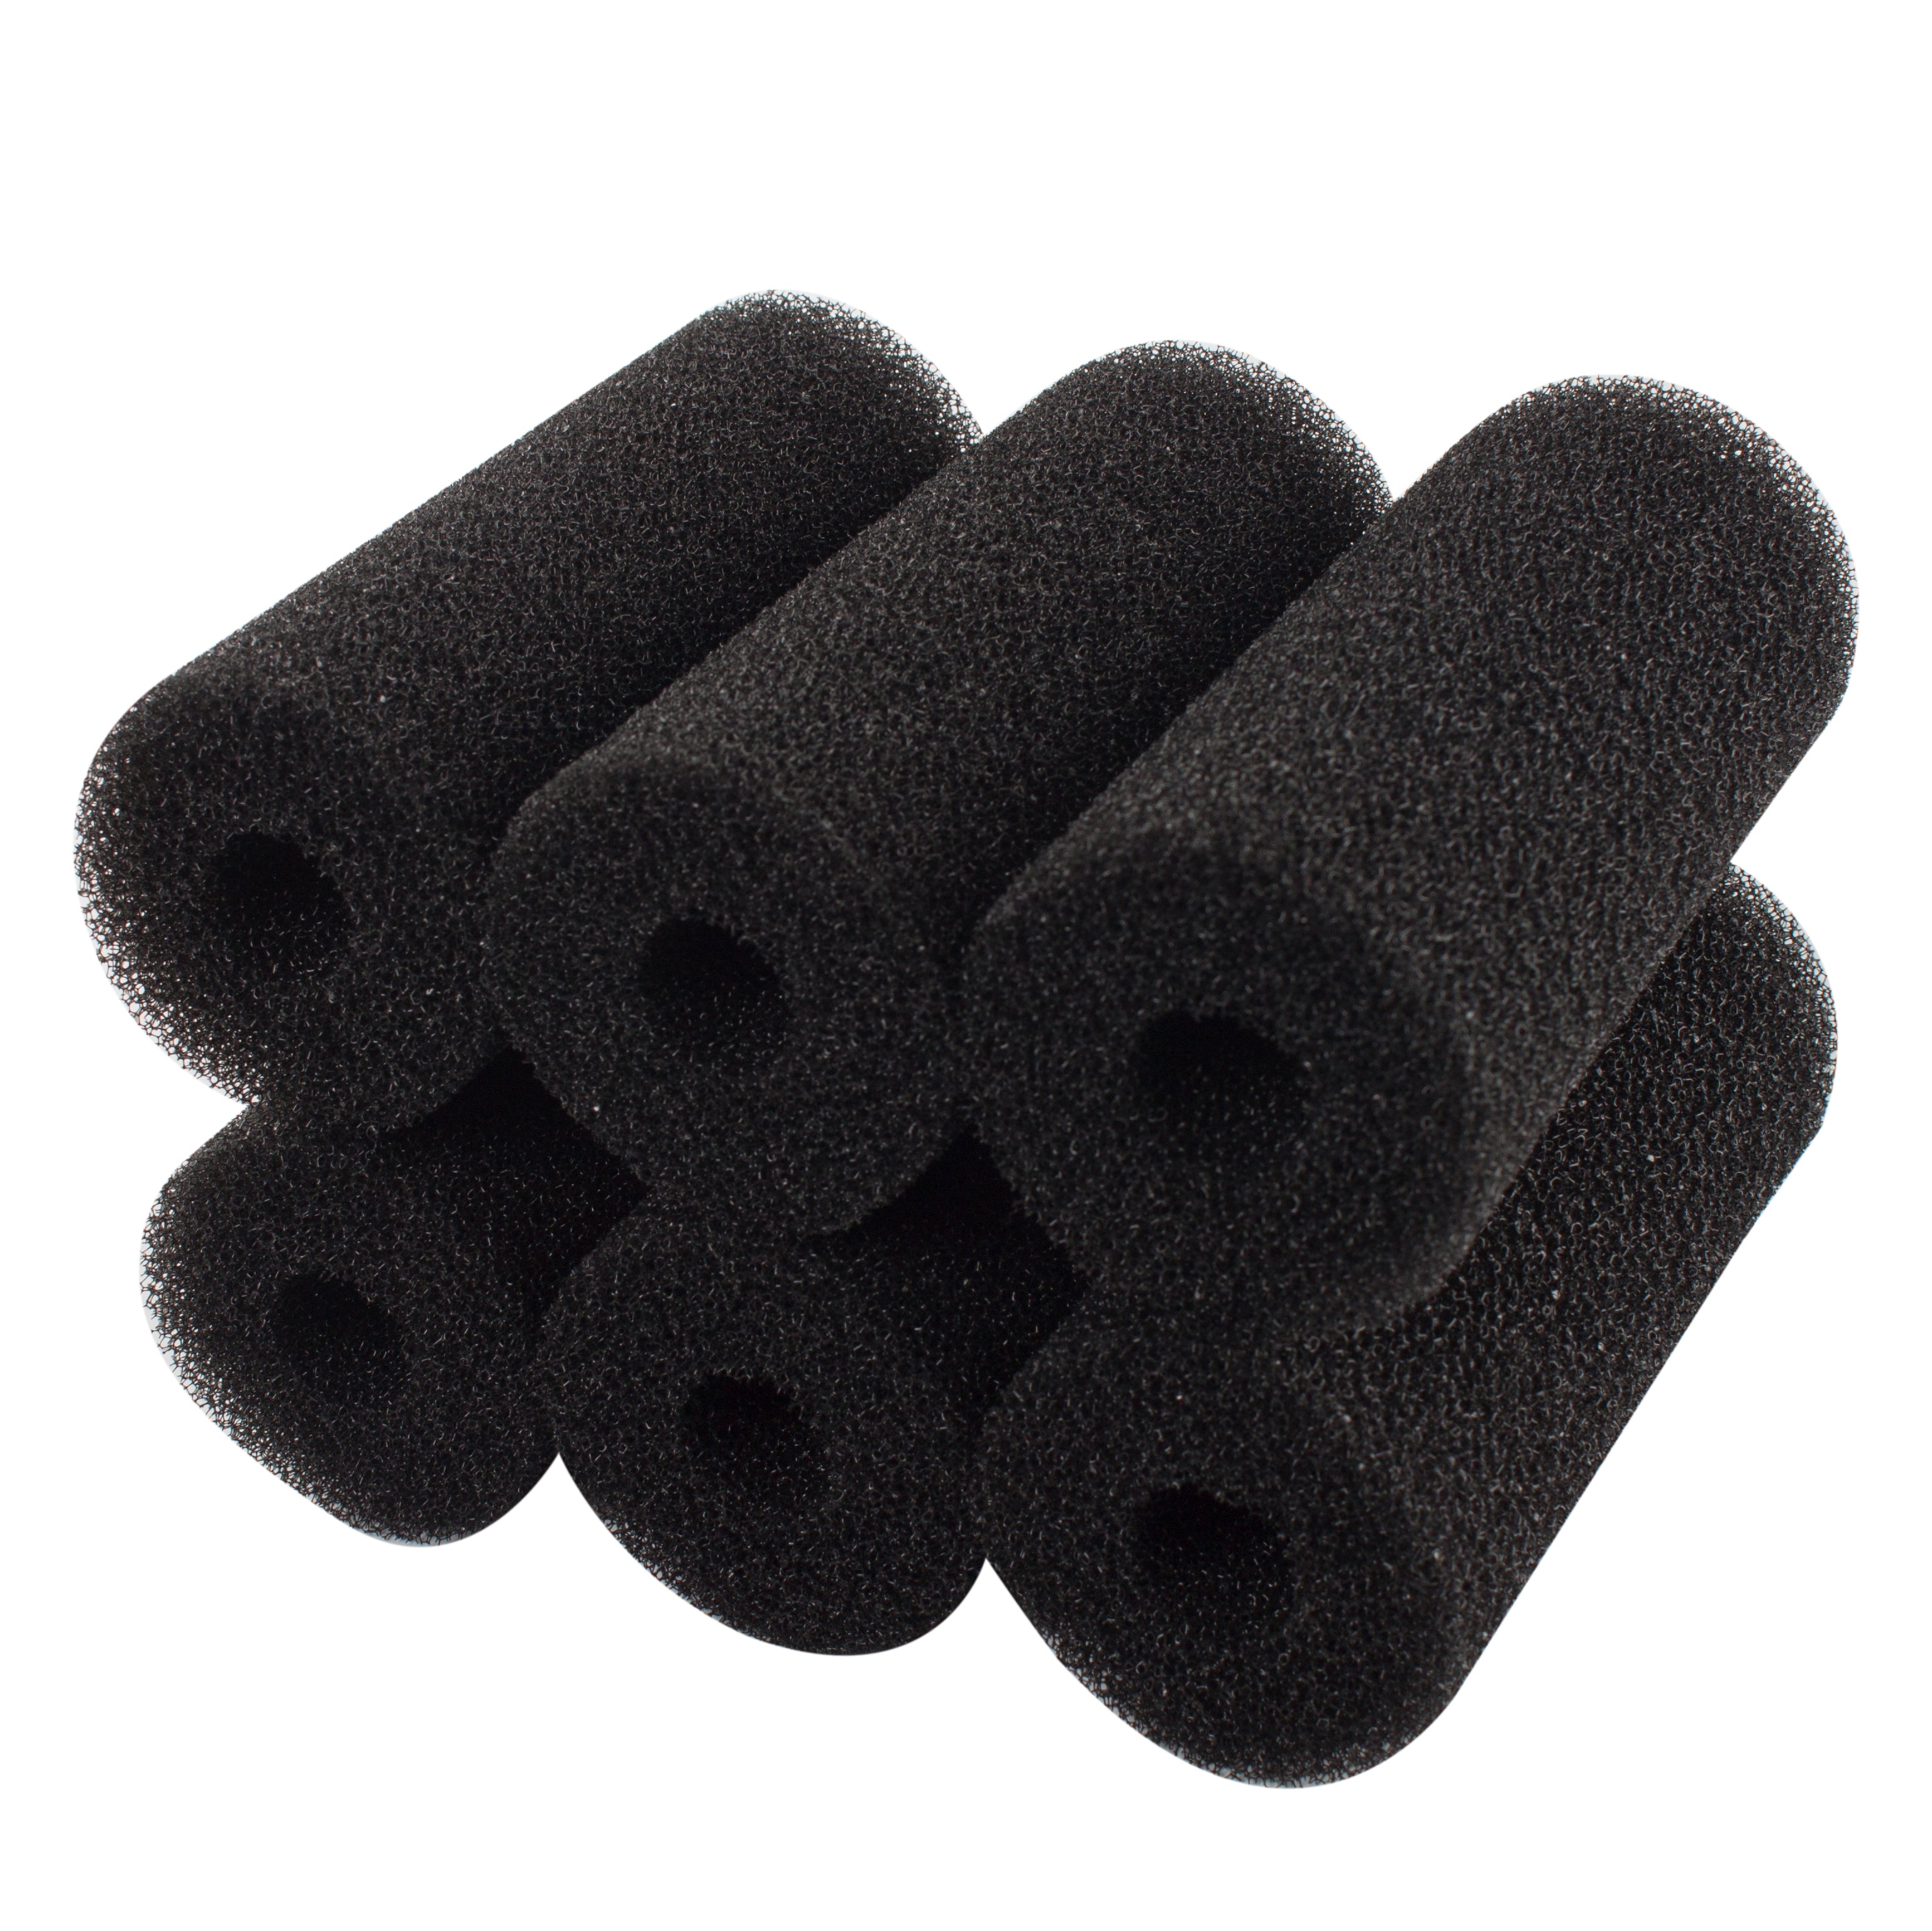 LTWHOME Pre-Filter Sponge Roll Fit for Beckett Pond G FR DP Pump, Part No 7209410 7137710 (Pack of 6)